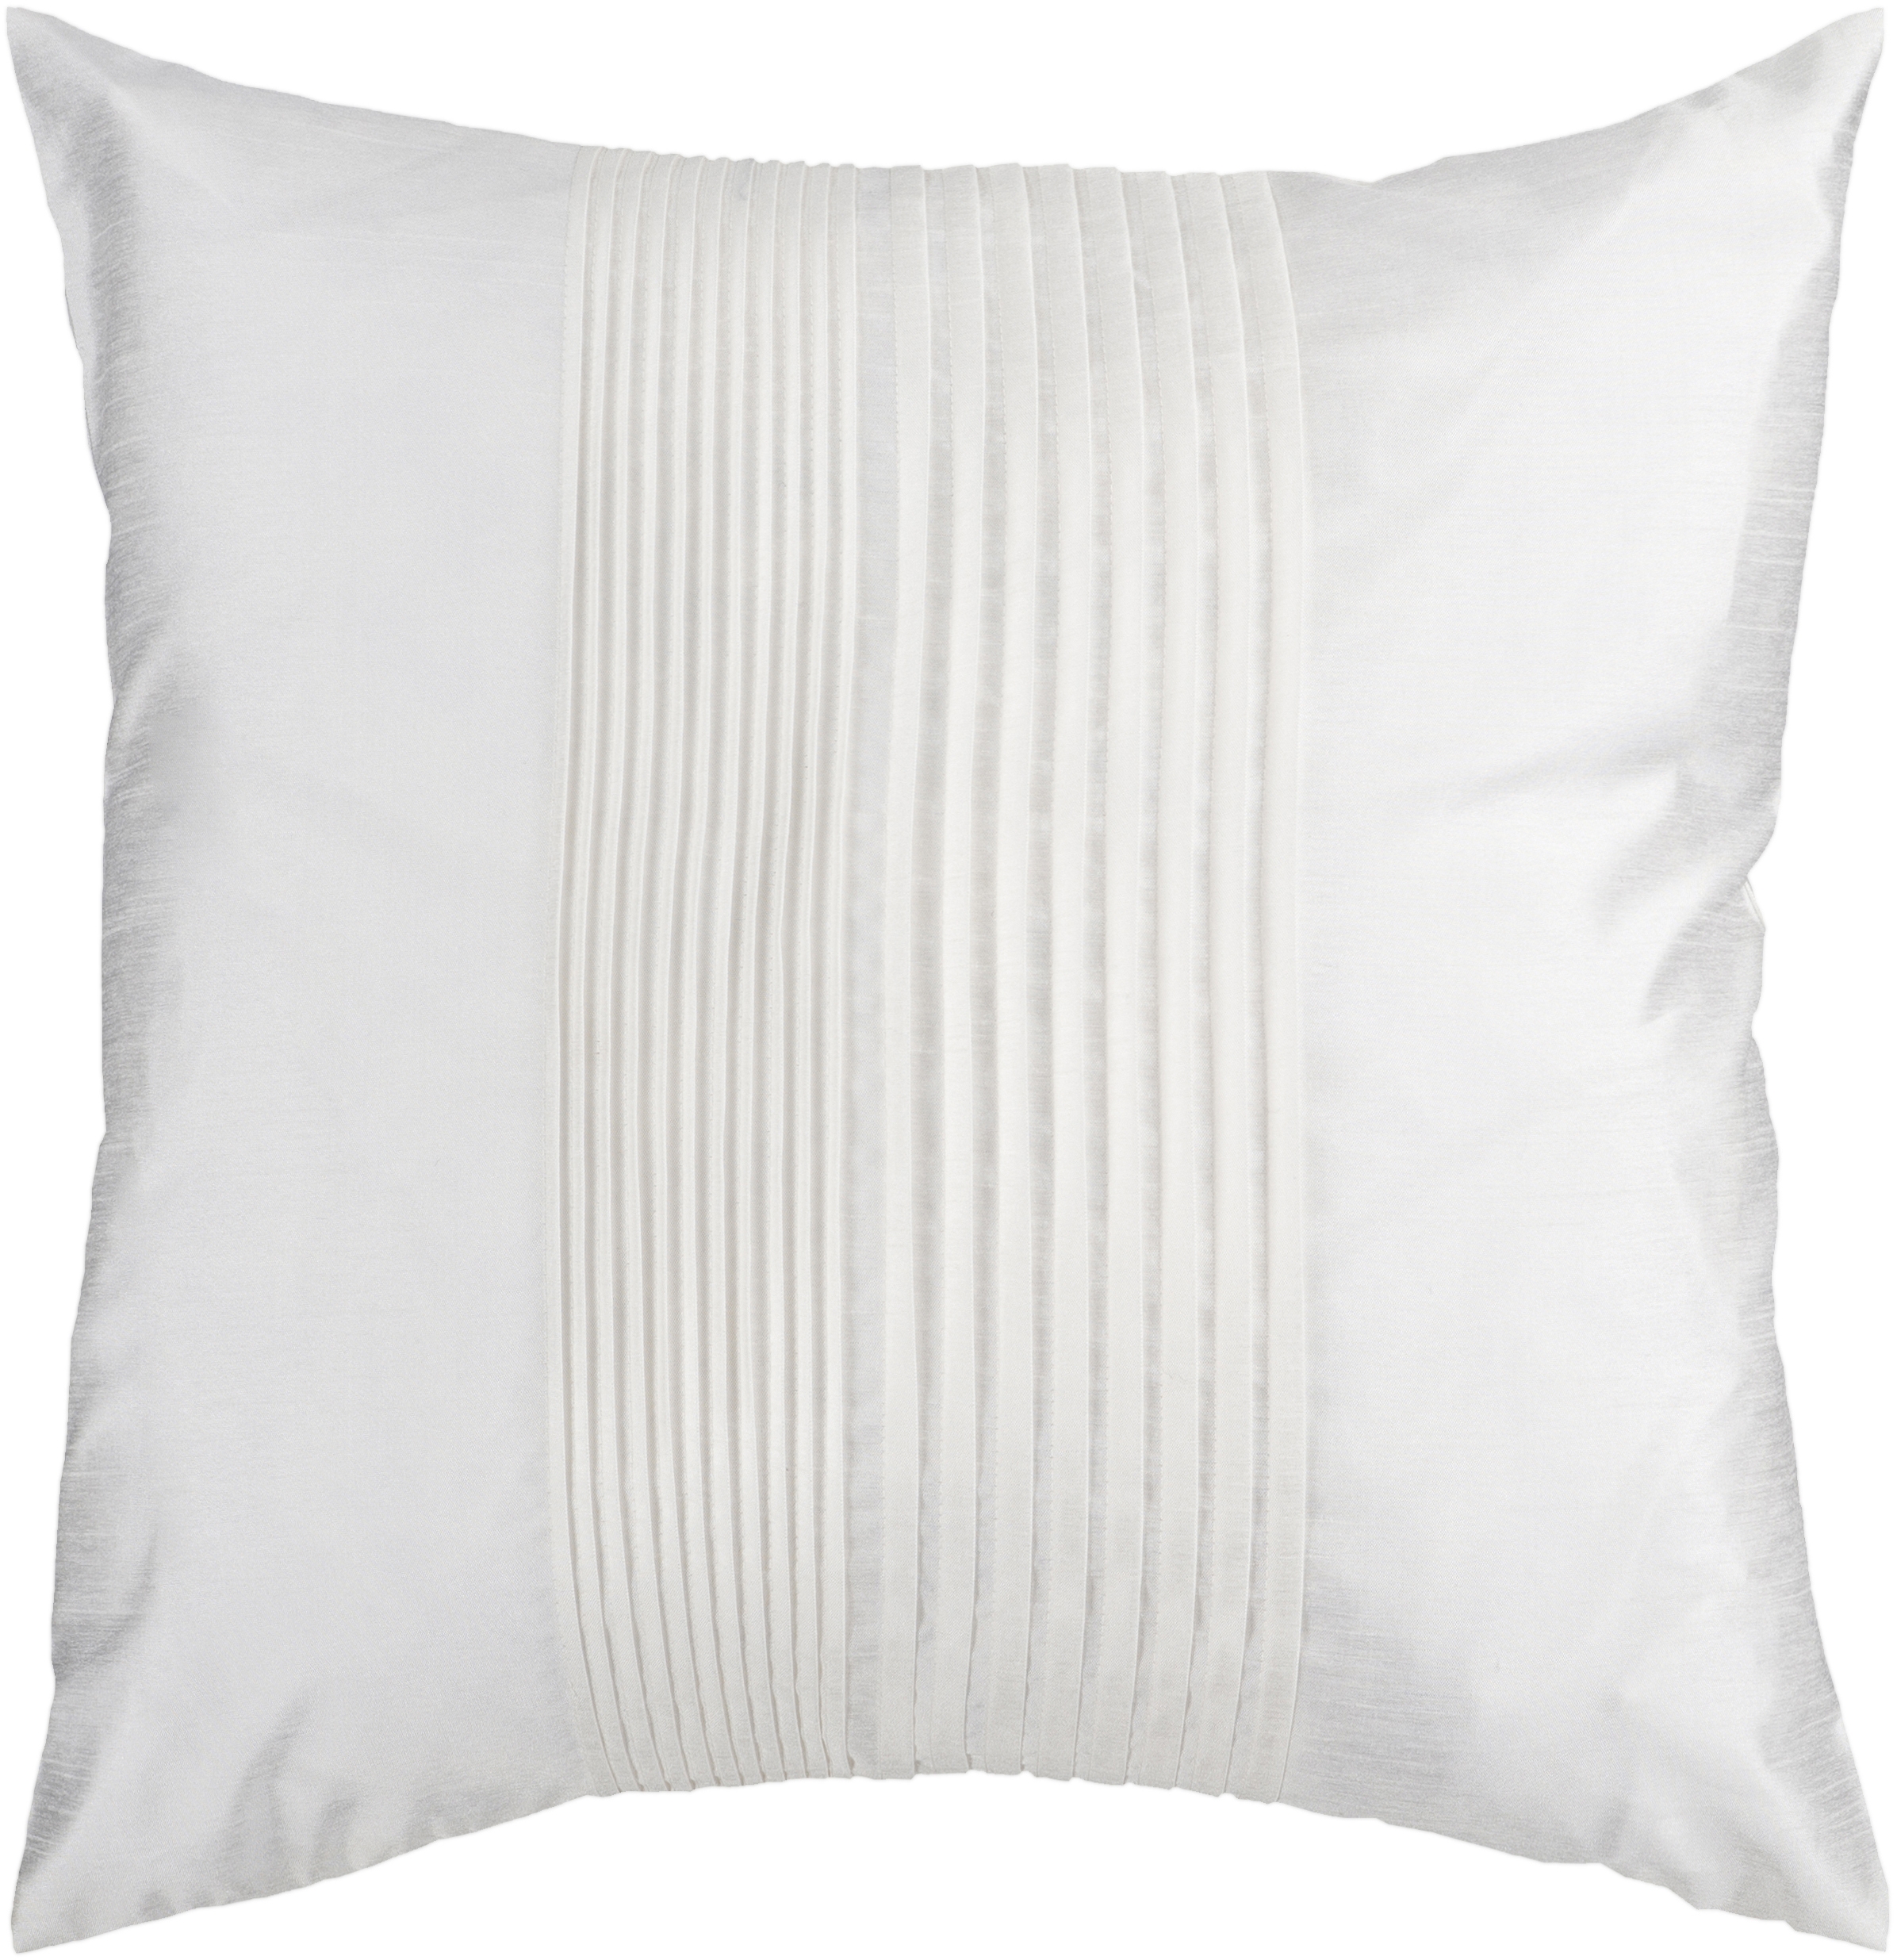 Solid Pleated Throw Pillow, 22" x 22", with down insert - Image 0